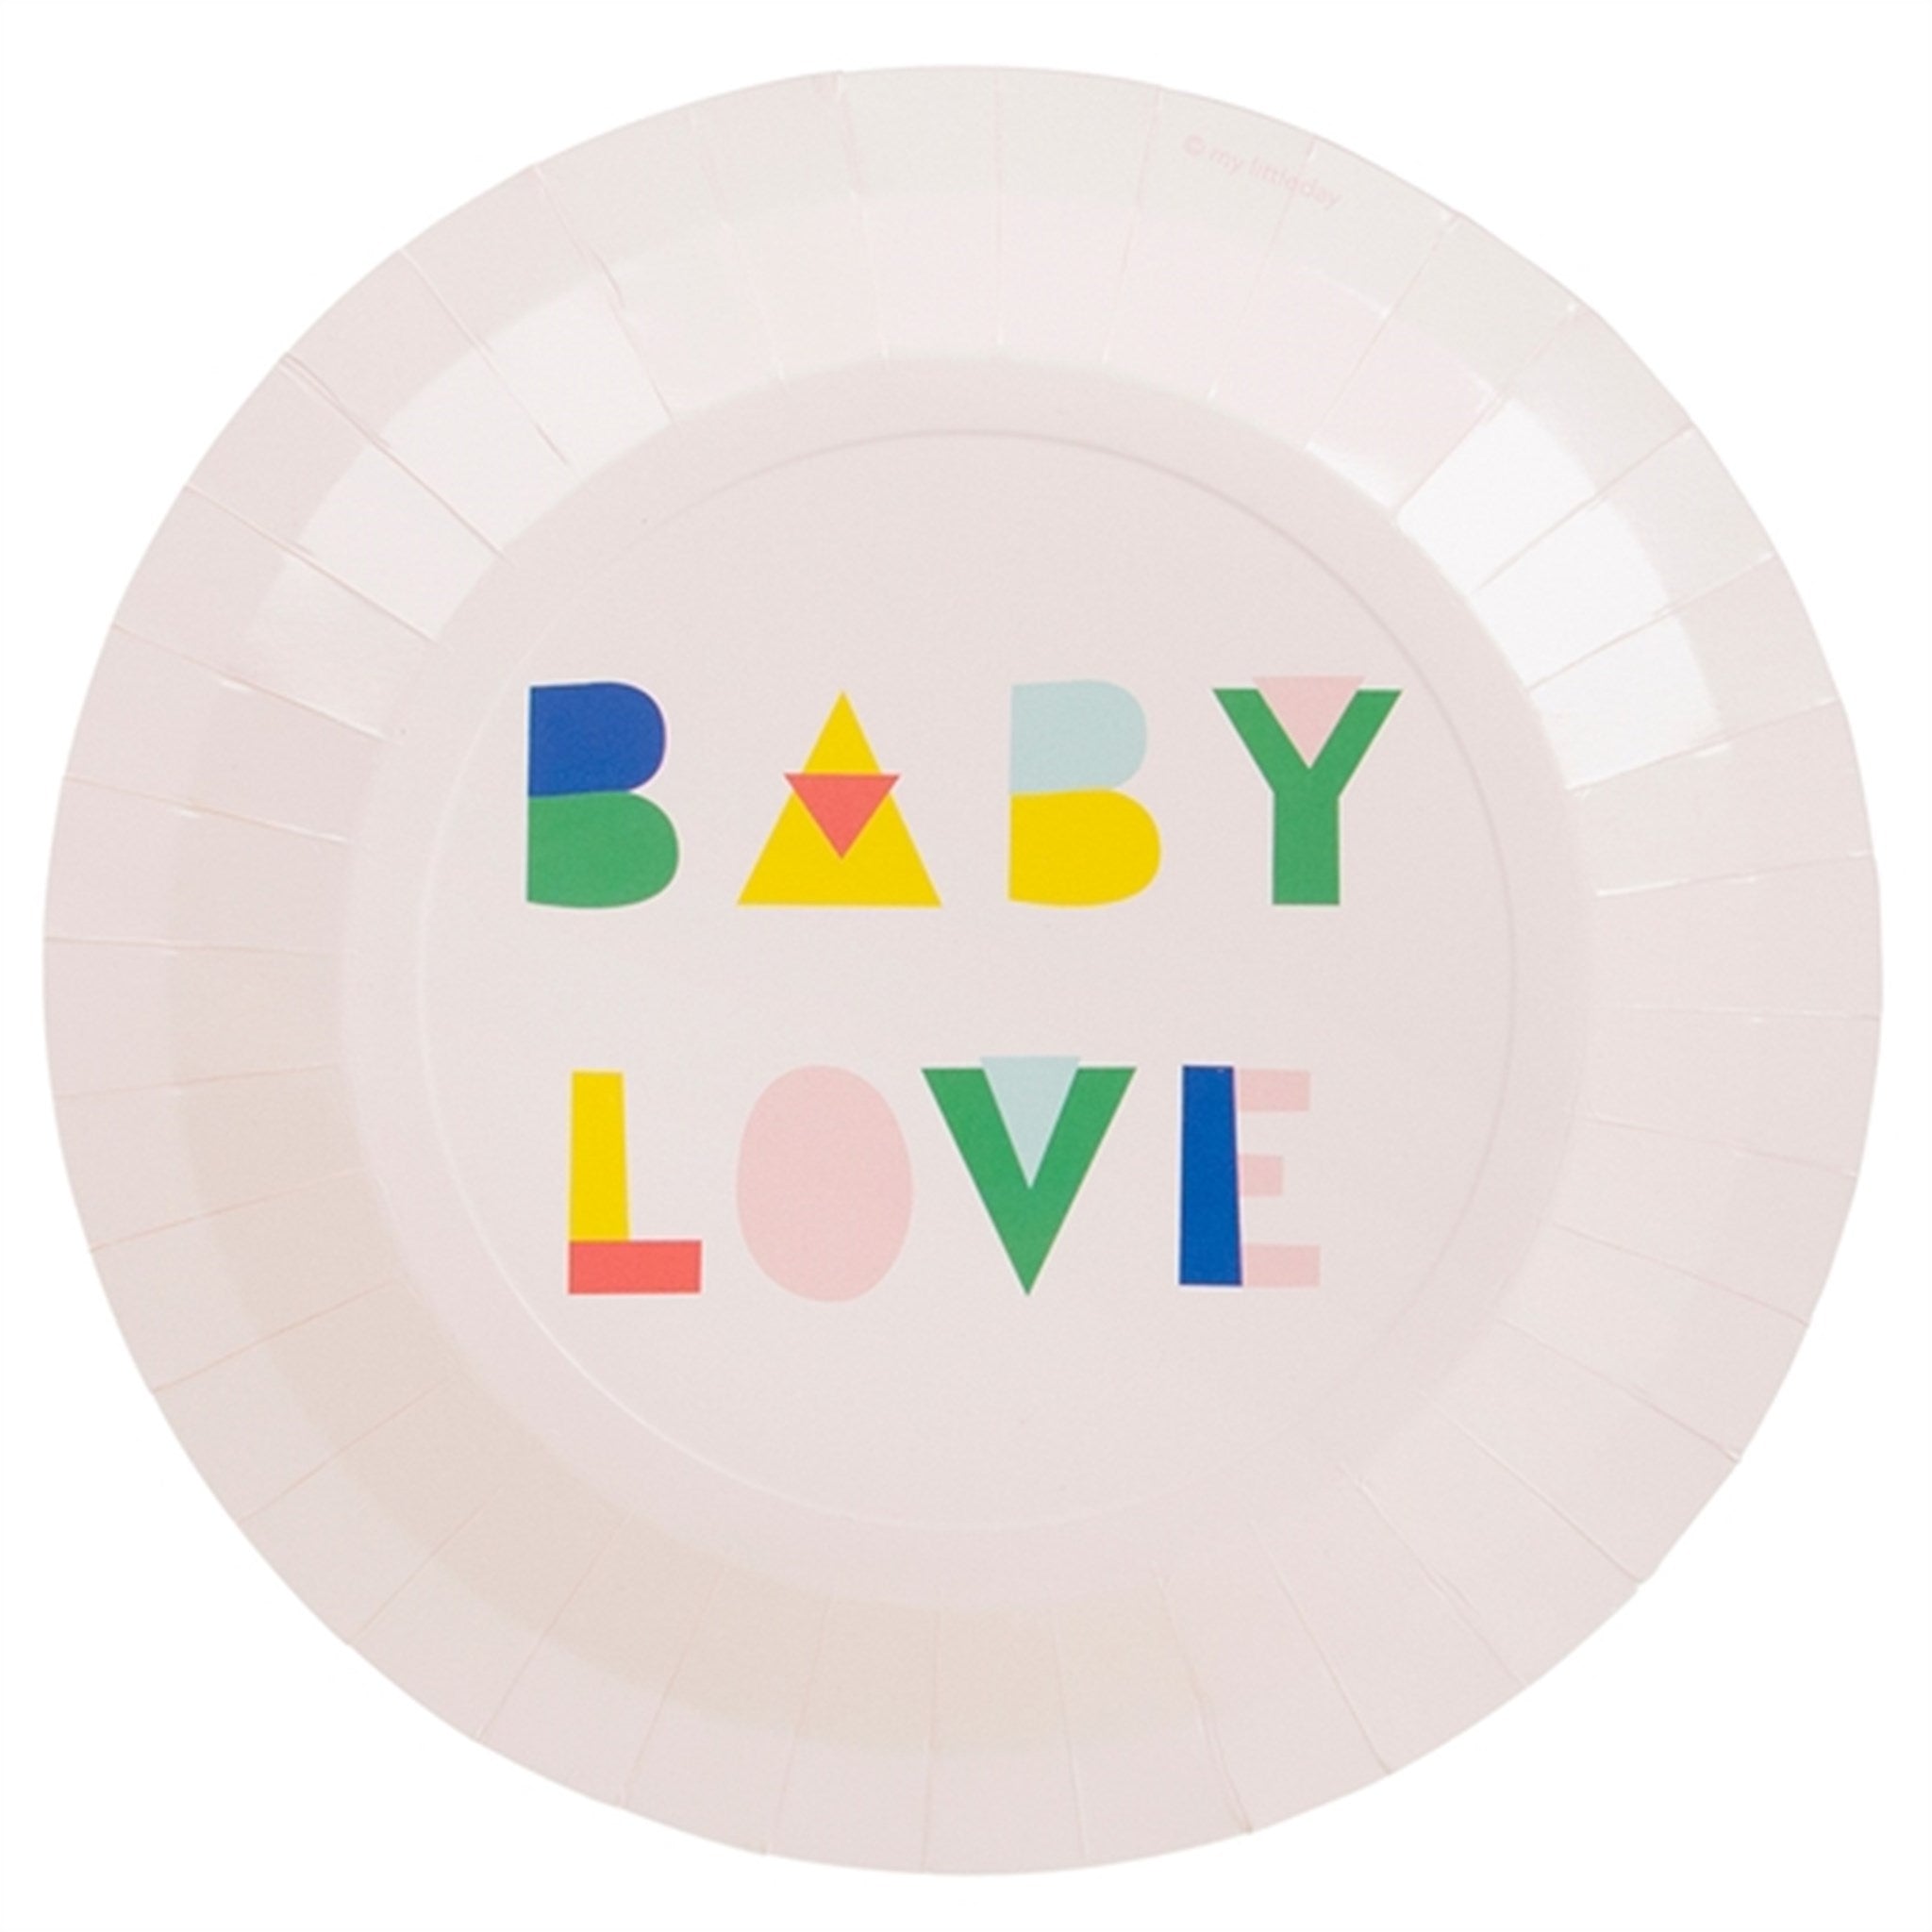 My Little Day Babyshower Nude Plates 8 pcs